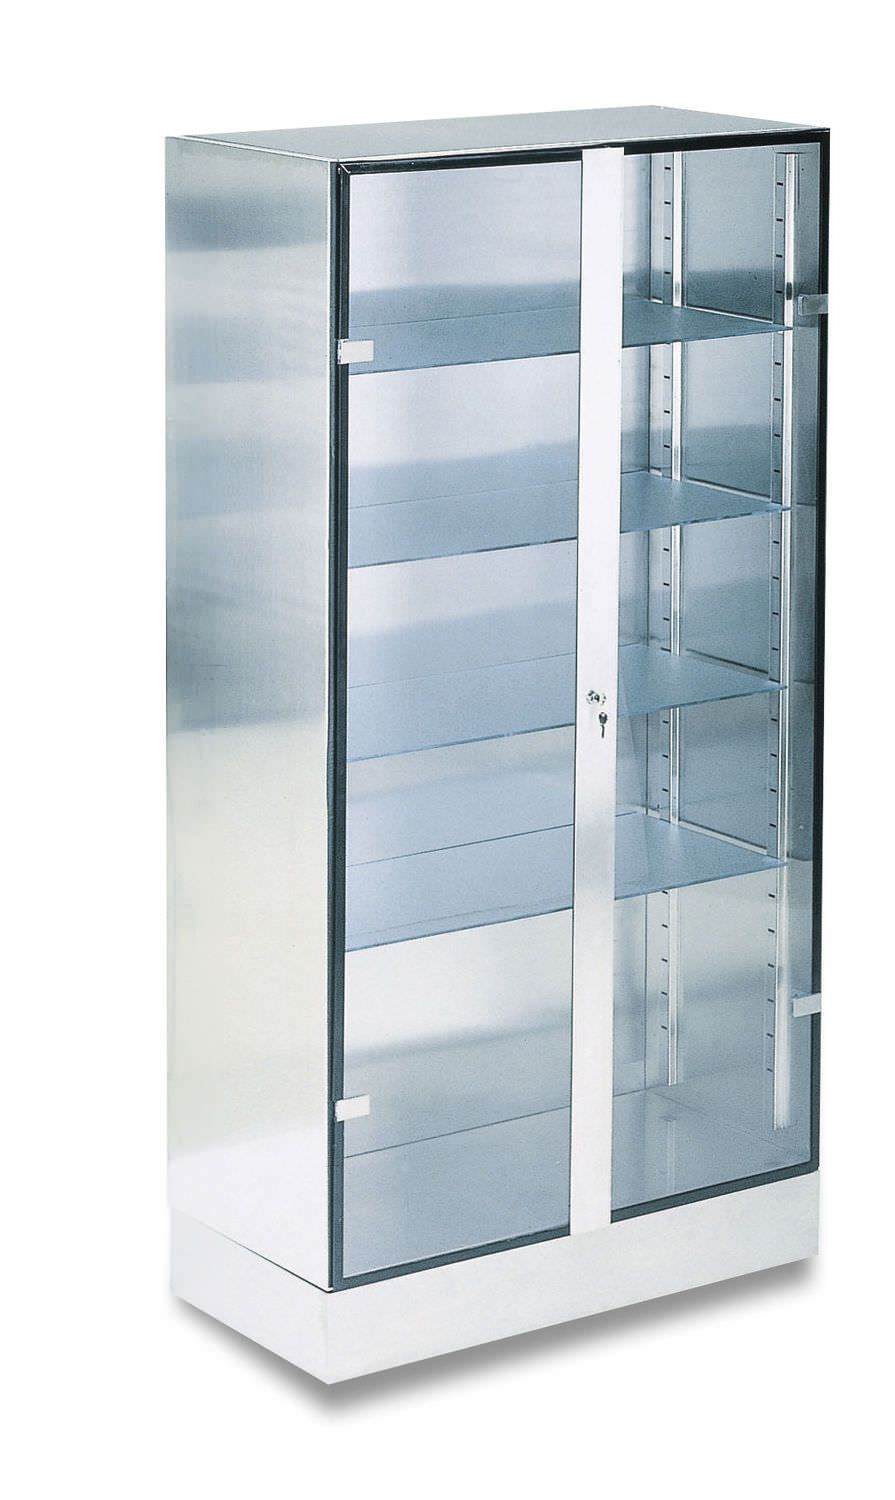 Medical cabinet / operating room / stainless steel galeno_1200-A PICOMED